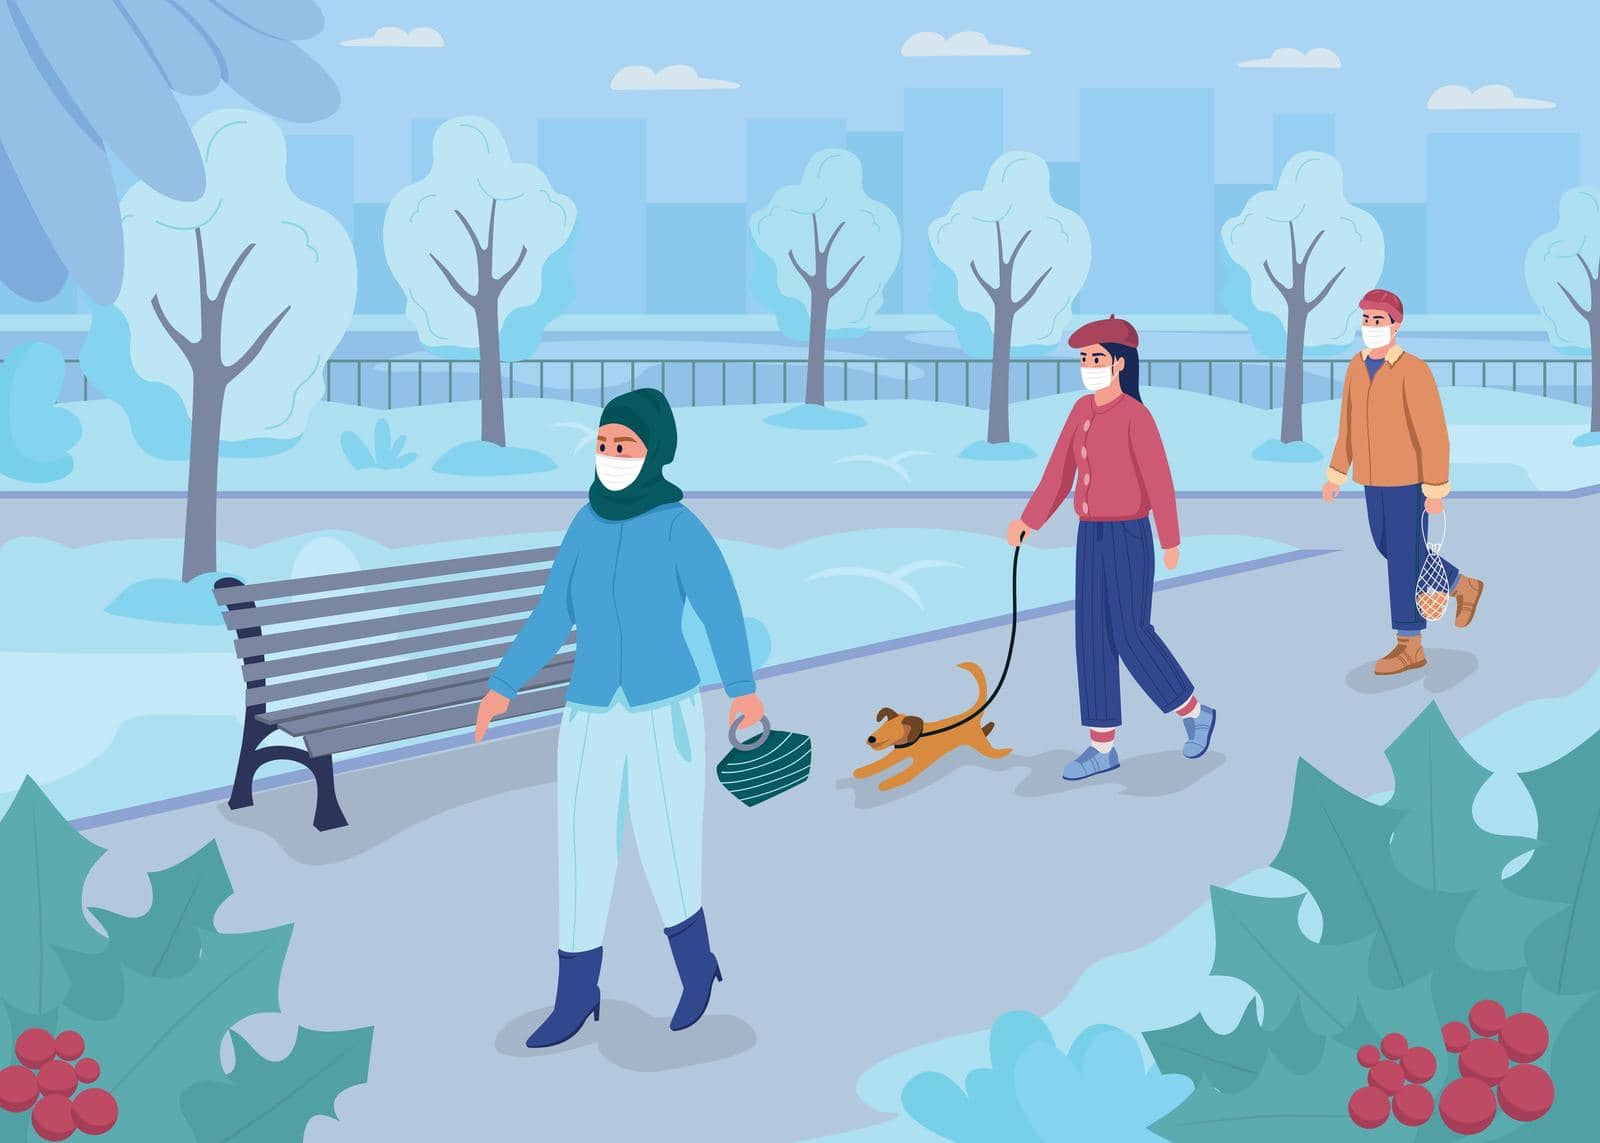 Walk in winter park in pandemic flat color vector illustration. Social distancing during wintertime. City at Christmas. People in face masks 2D cartoon characters with landscape on background